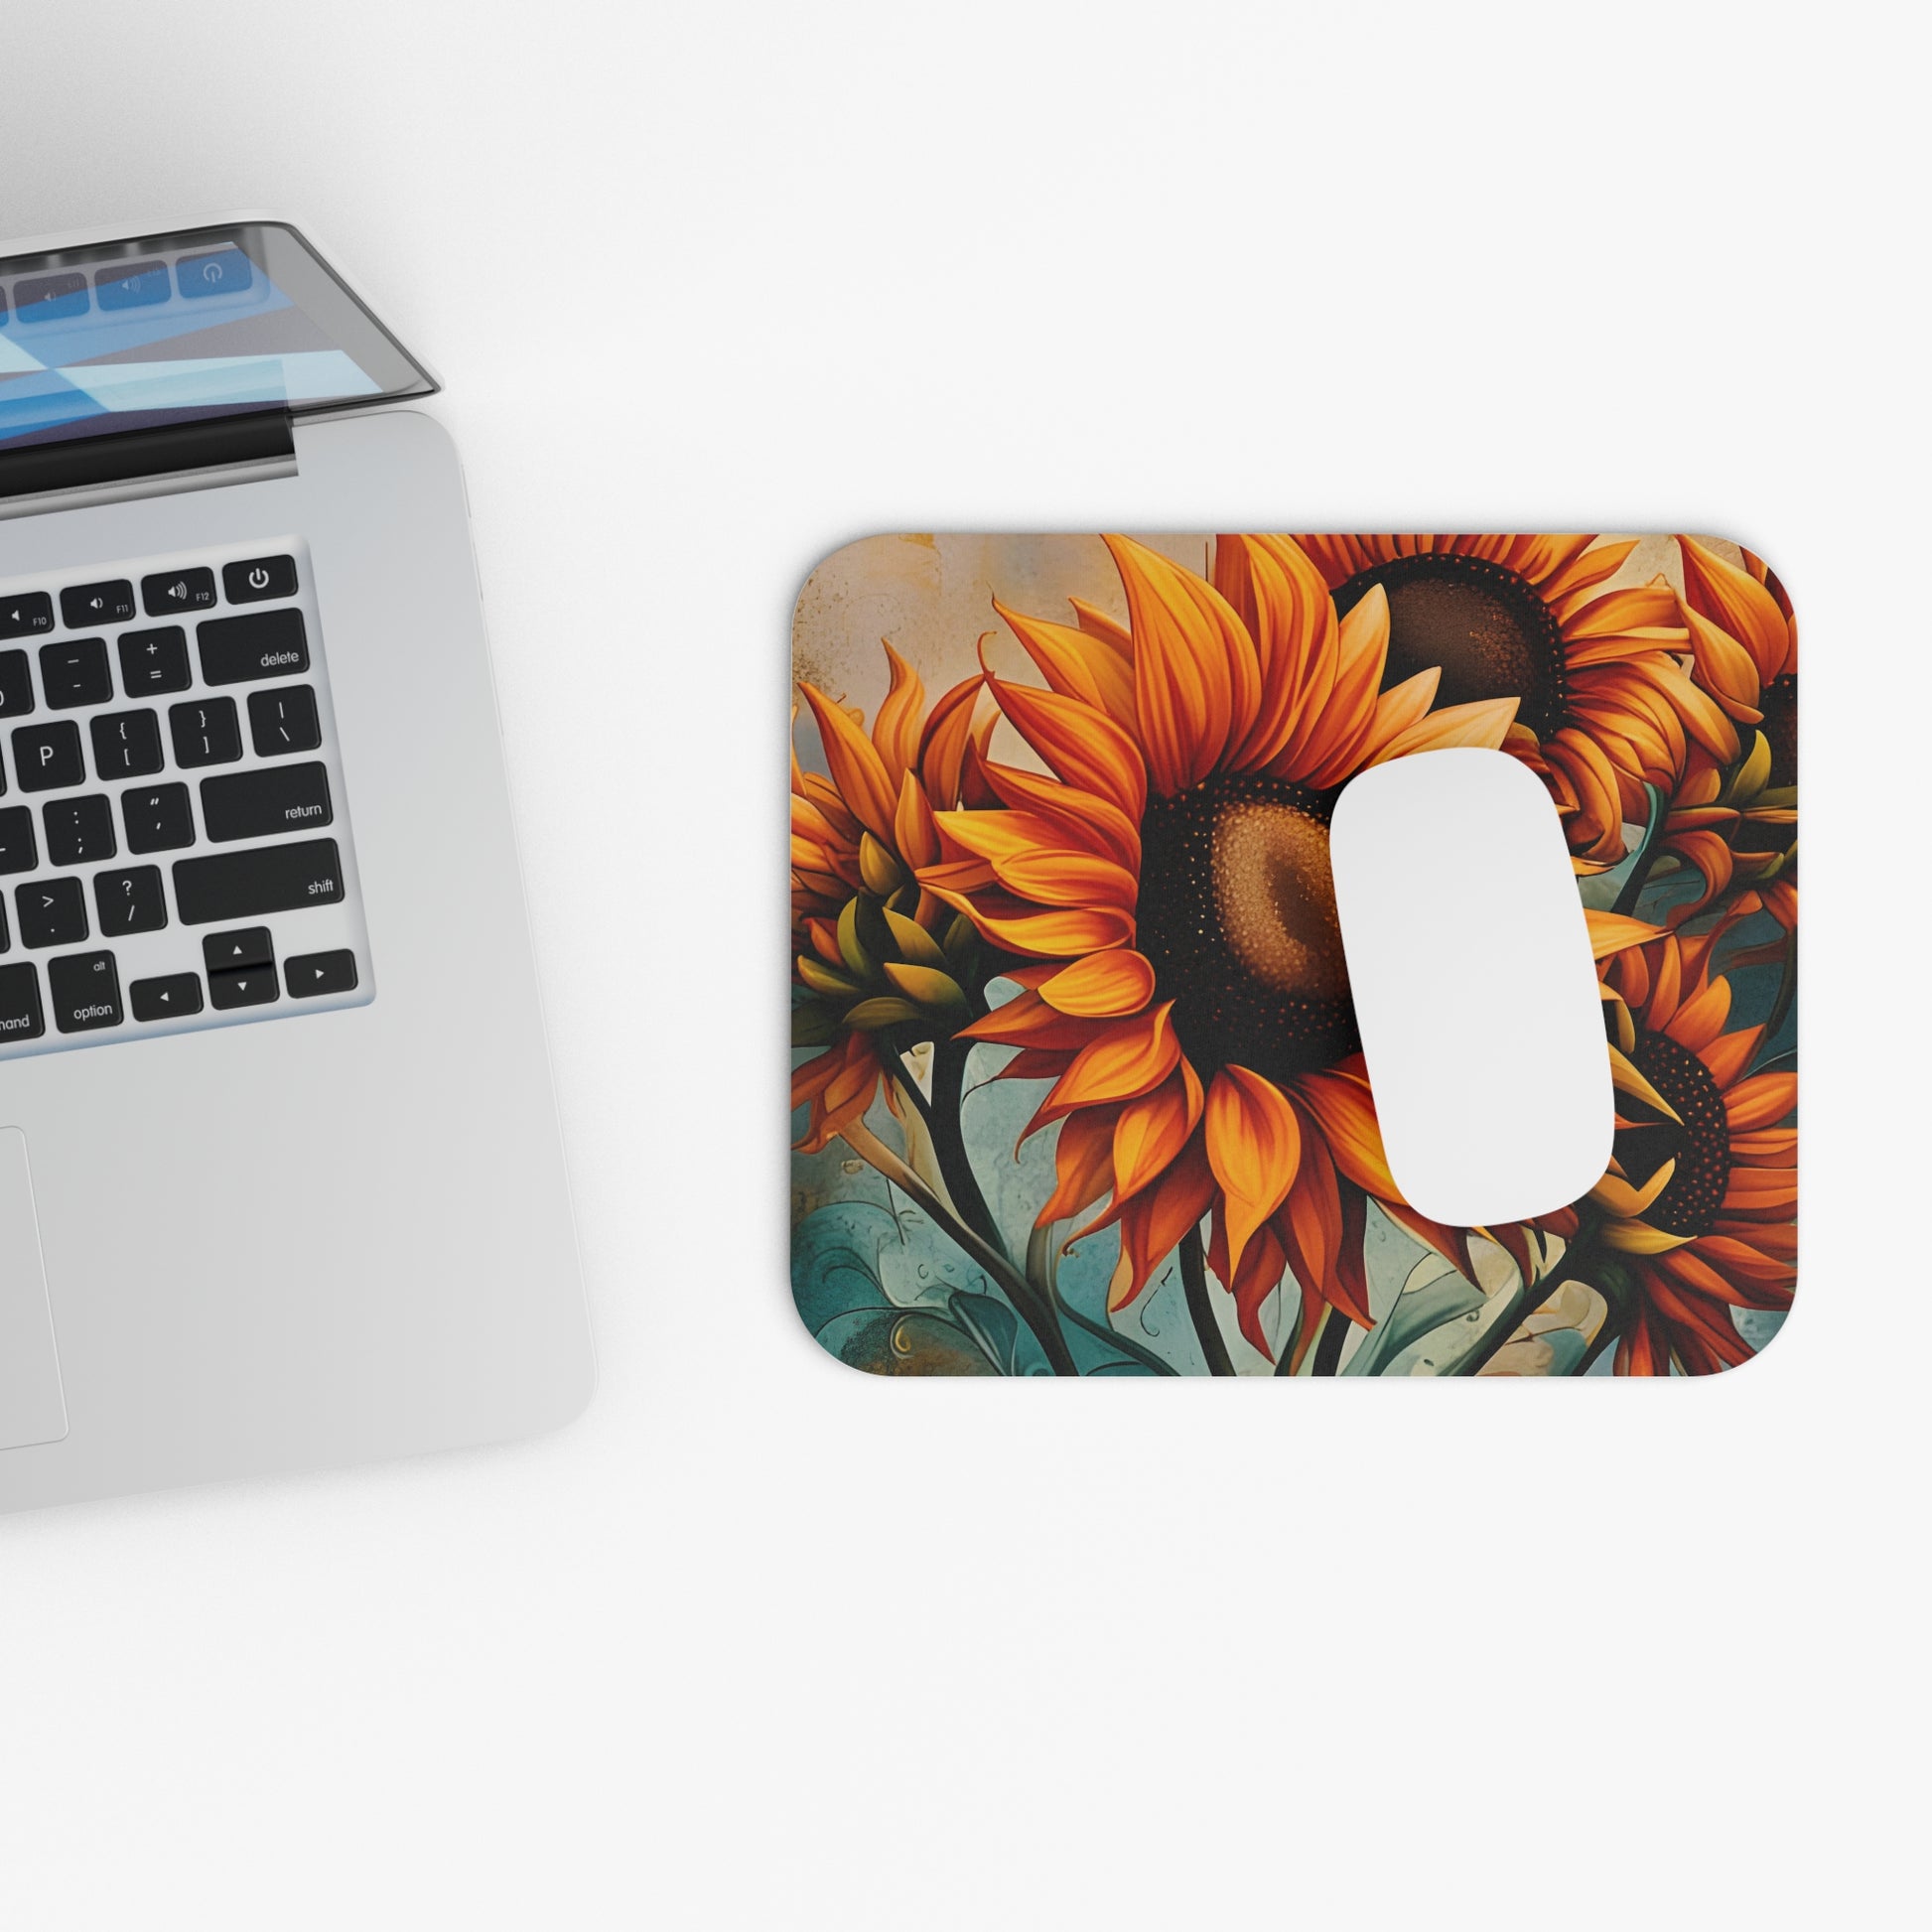 Sunflower Crop on Distressed Blue and Copper Background Printed on Mouse Pad on desk